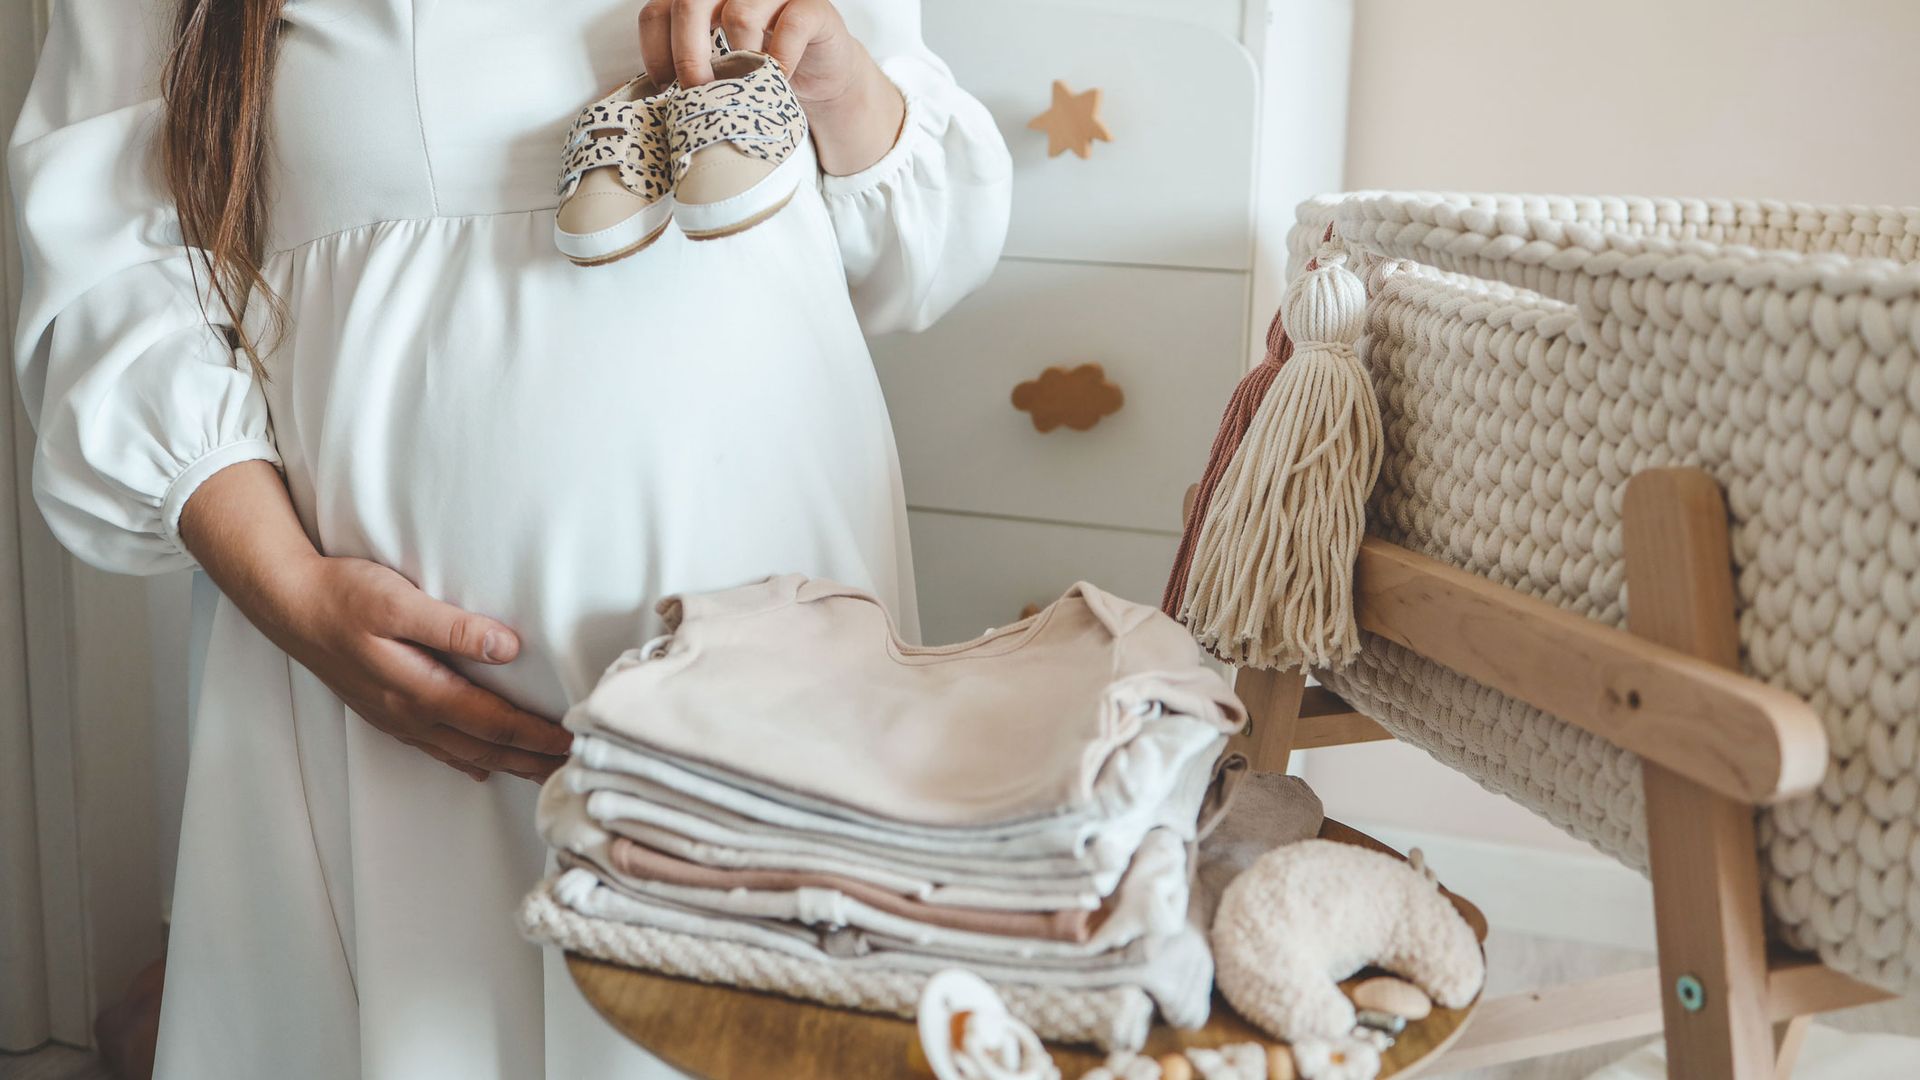 Pregnant woman in white dress prepping nursery for newborn